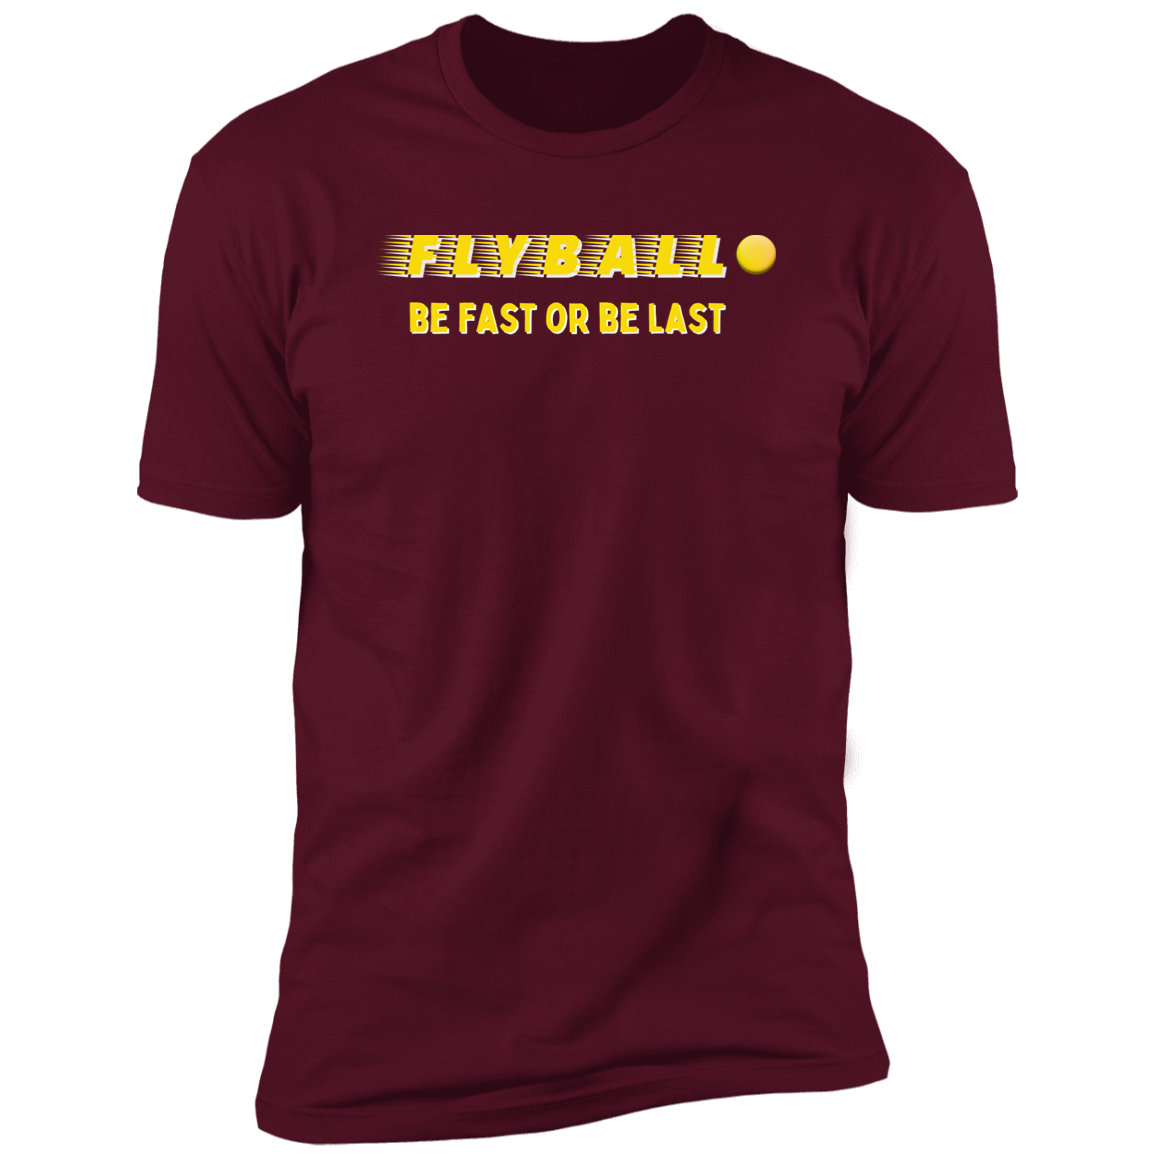 Flyball Be Fast or Be Last Dog Sport T-shirt, Flyball Shirt for humans, in maroon